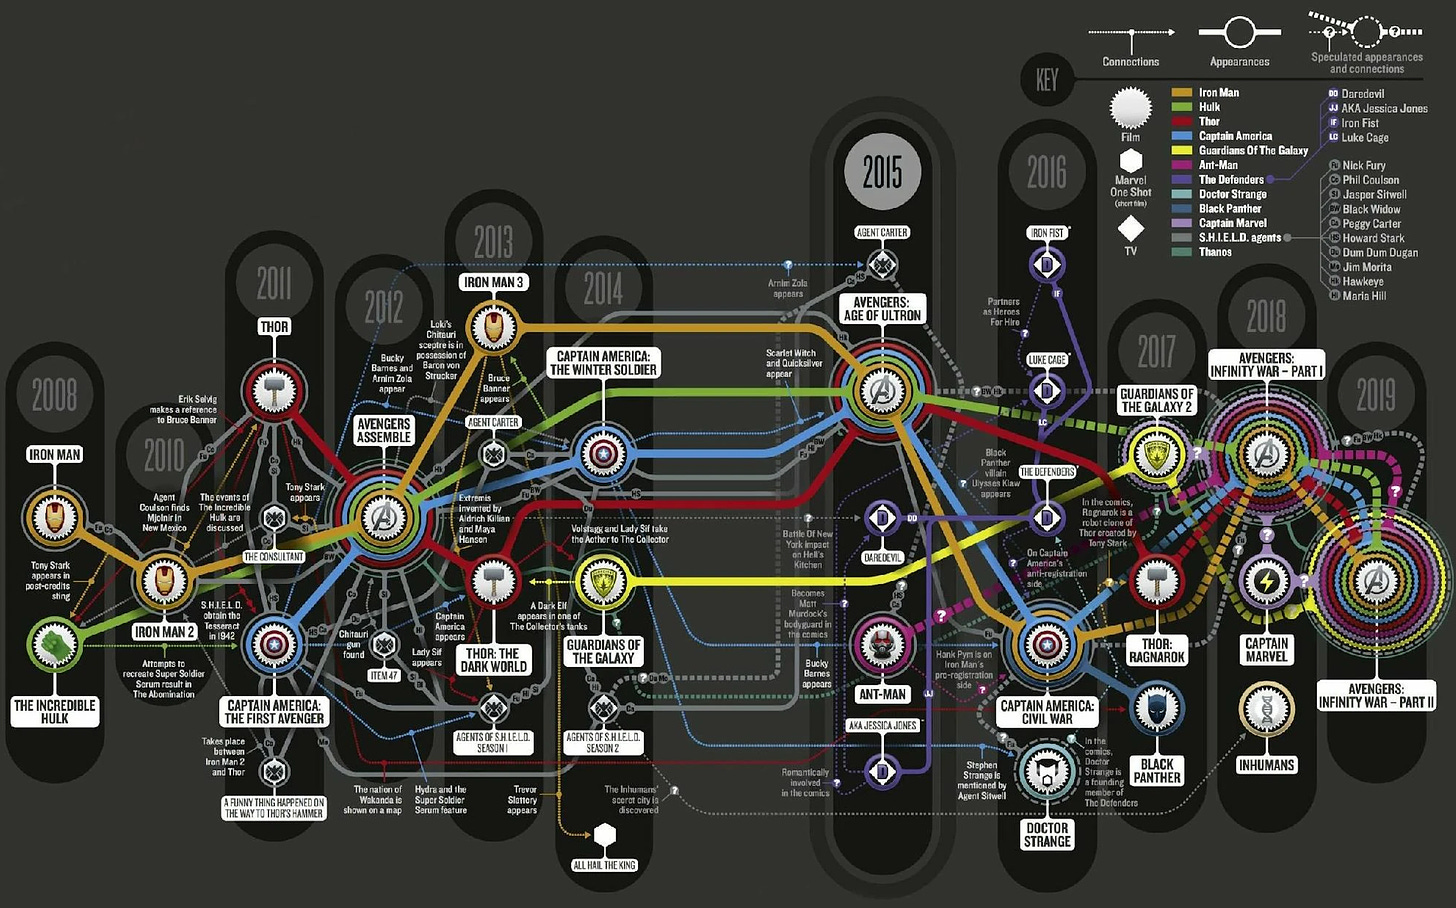 An incredibly complex map of Marvel universe